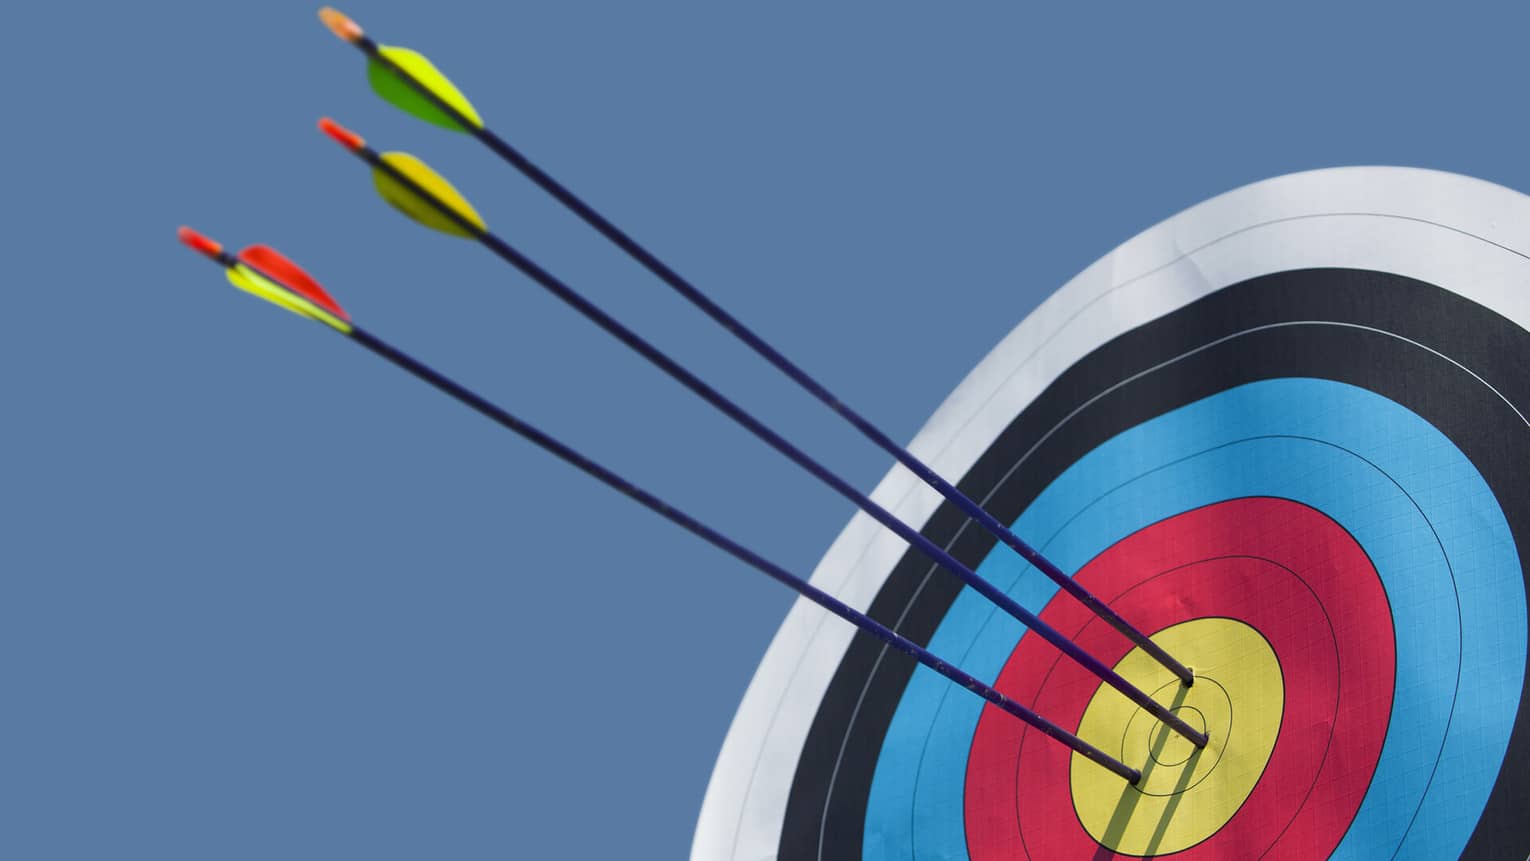 Three arrows with long black shafts pierce the gold circle at the centre of a bull's-eye against the backdrop of a blue sky.